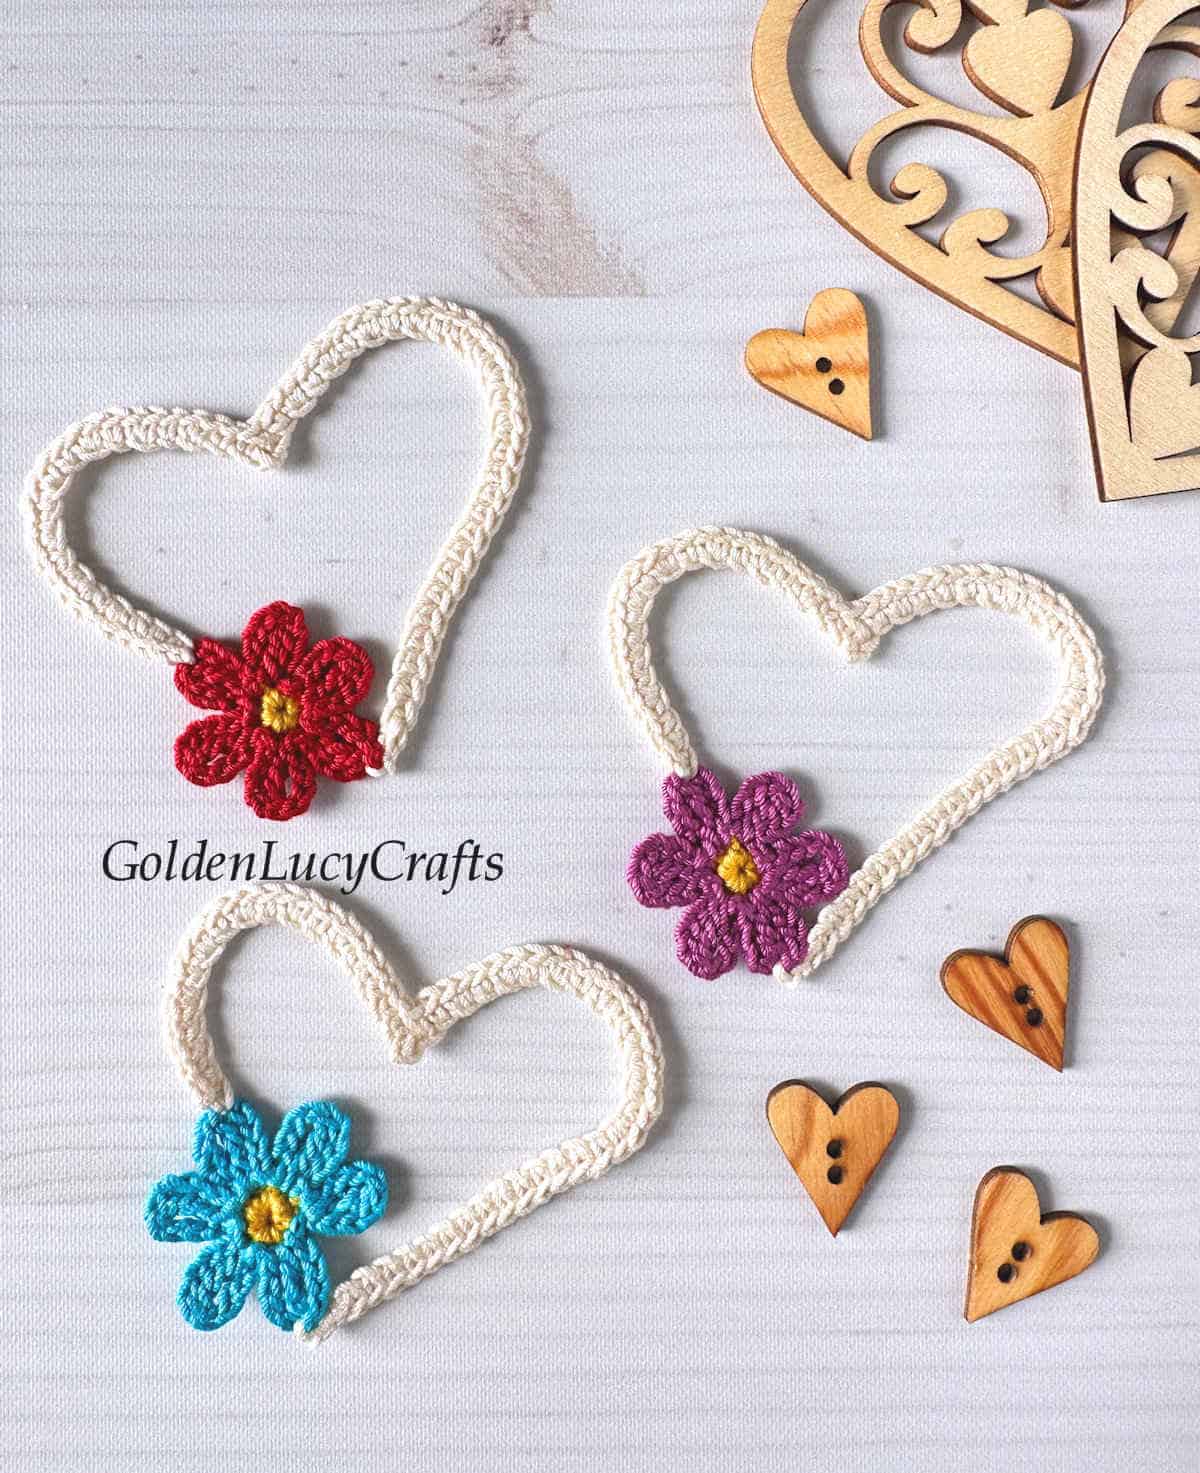 Three crocheted hearts with flowers incorporated in them.